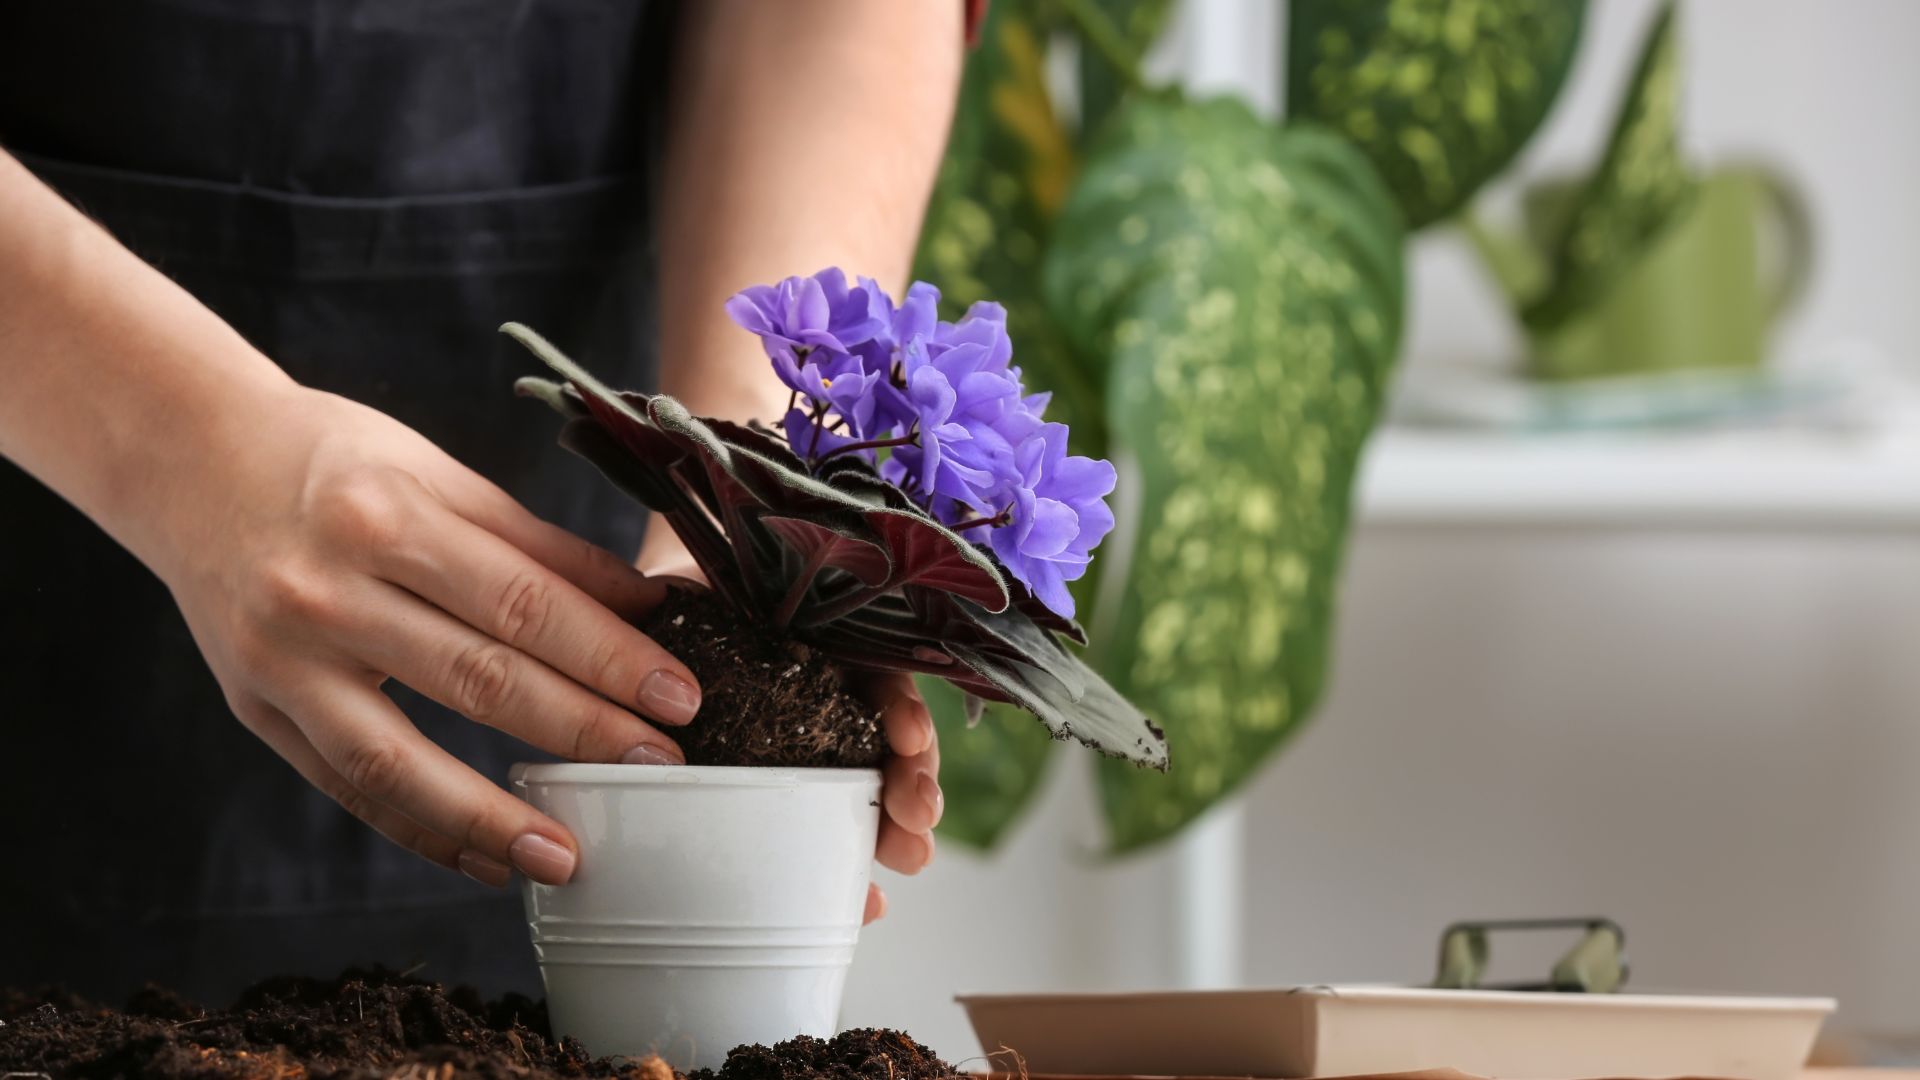 11 Simple Steps For Repotting African Violets For More Blossoms